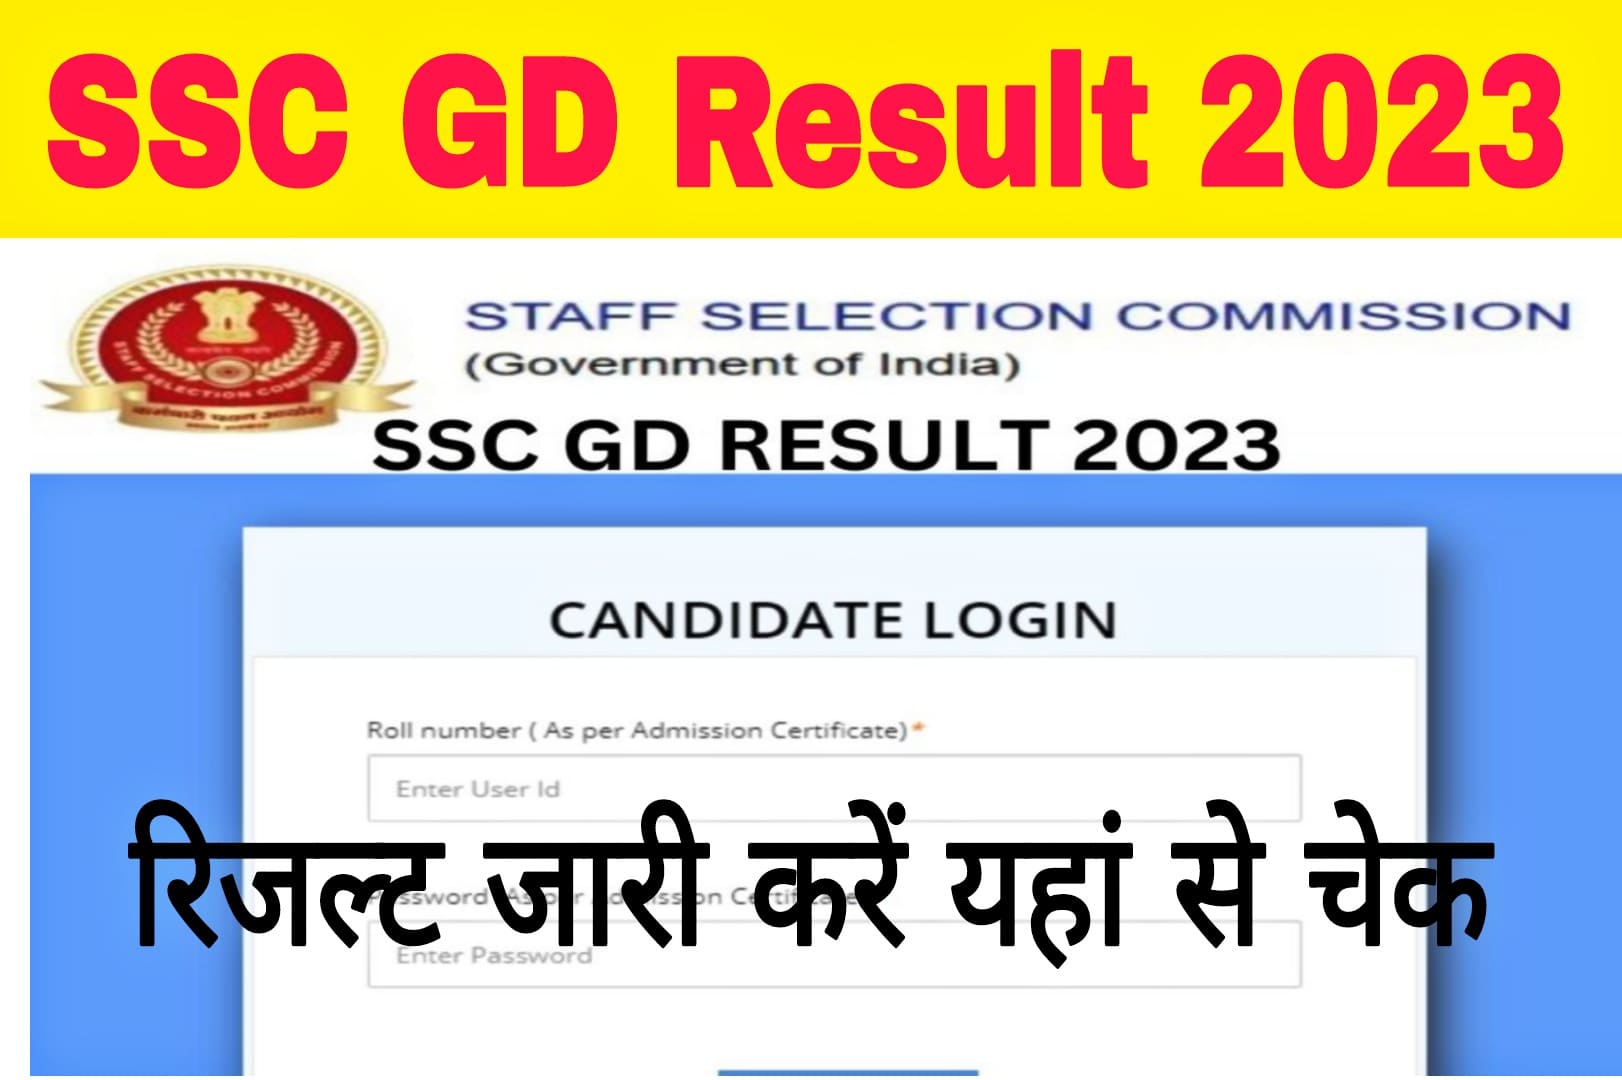 SSC GD Result 2023 in Hindi